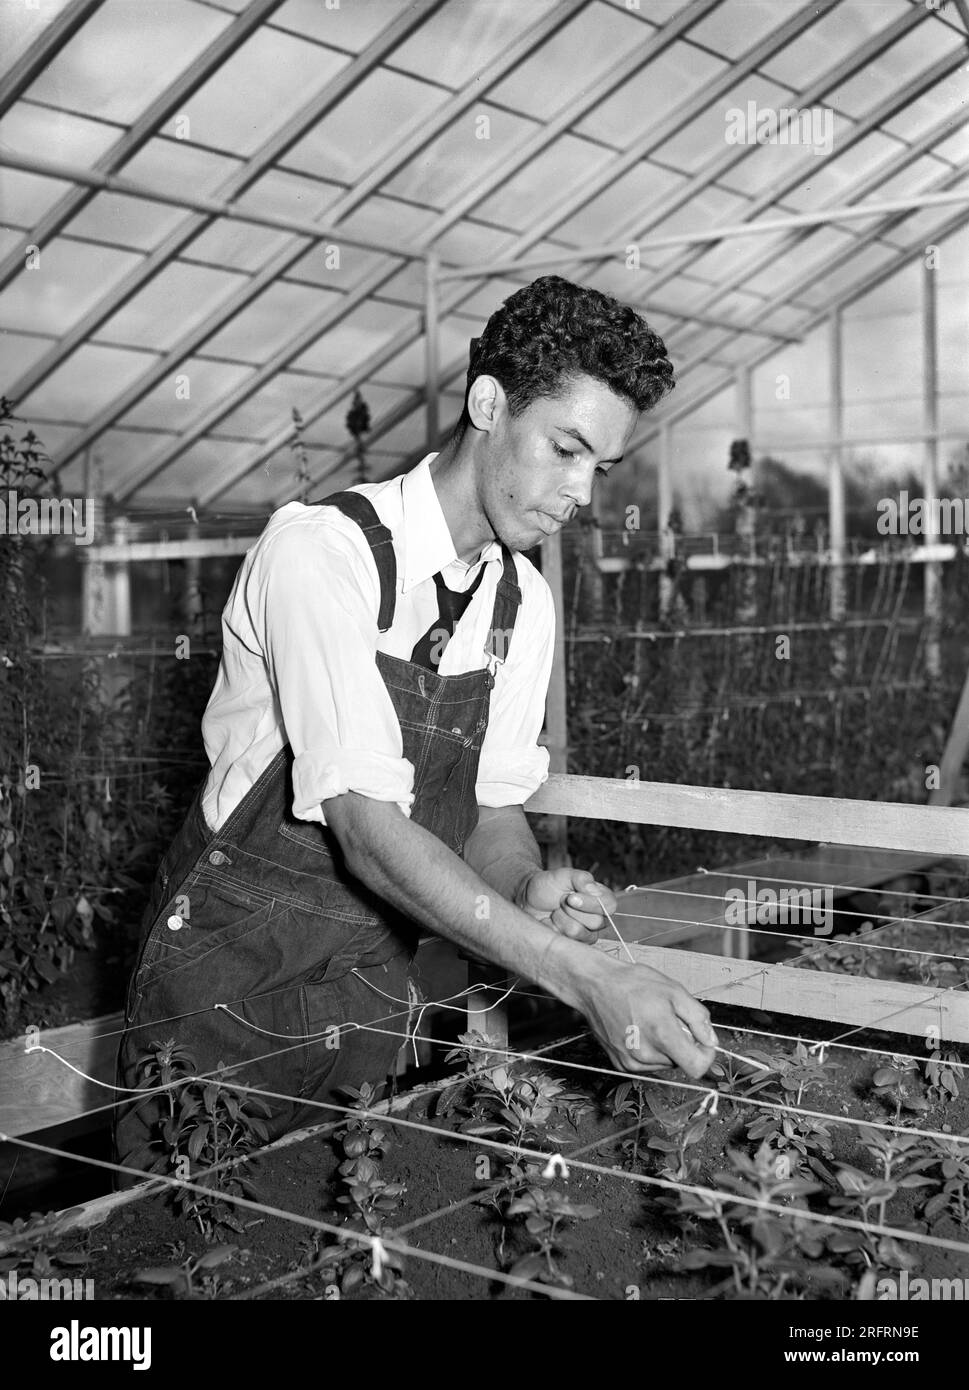 Student in greenhouse, Tuskegee Institute, Tuskegee, Alabama, USA, Arthur Rothstein, U.S. Office of War Information, March 1942 Stock Photo